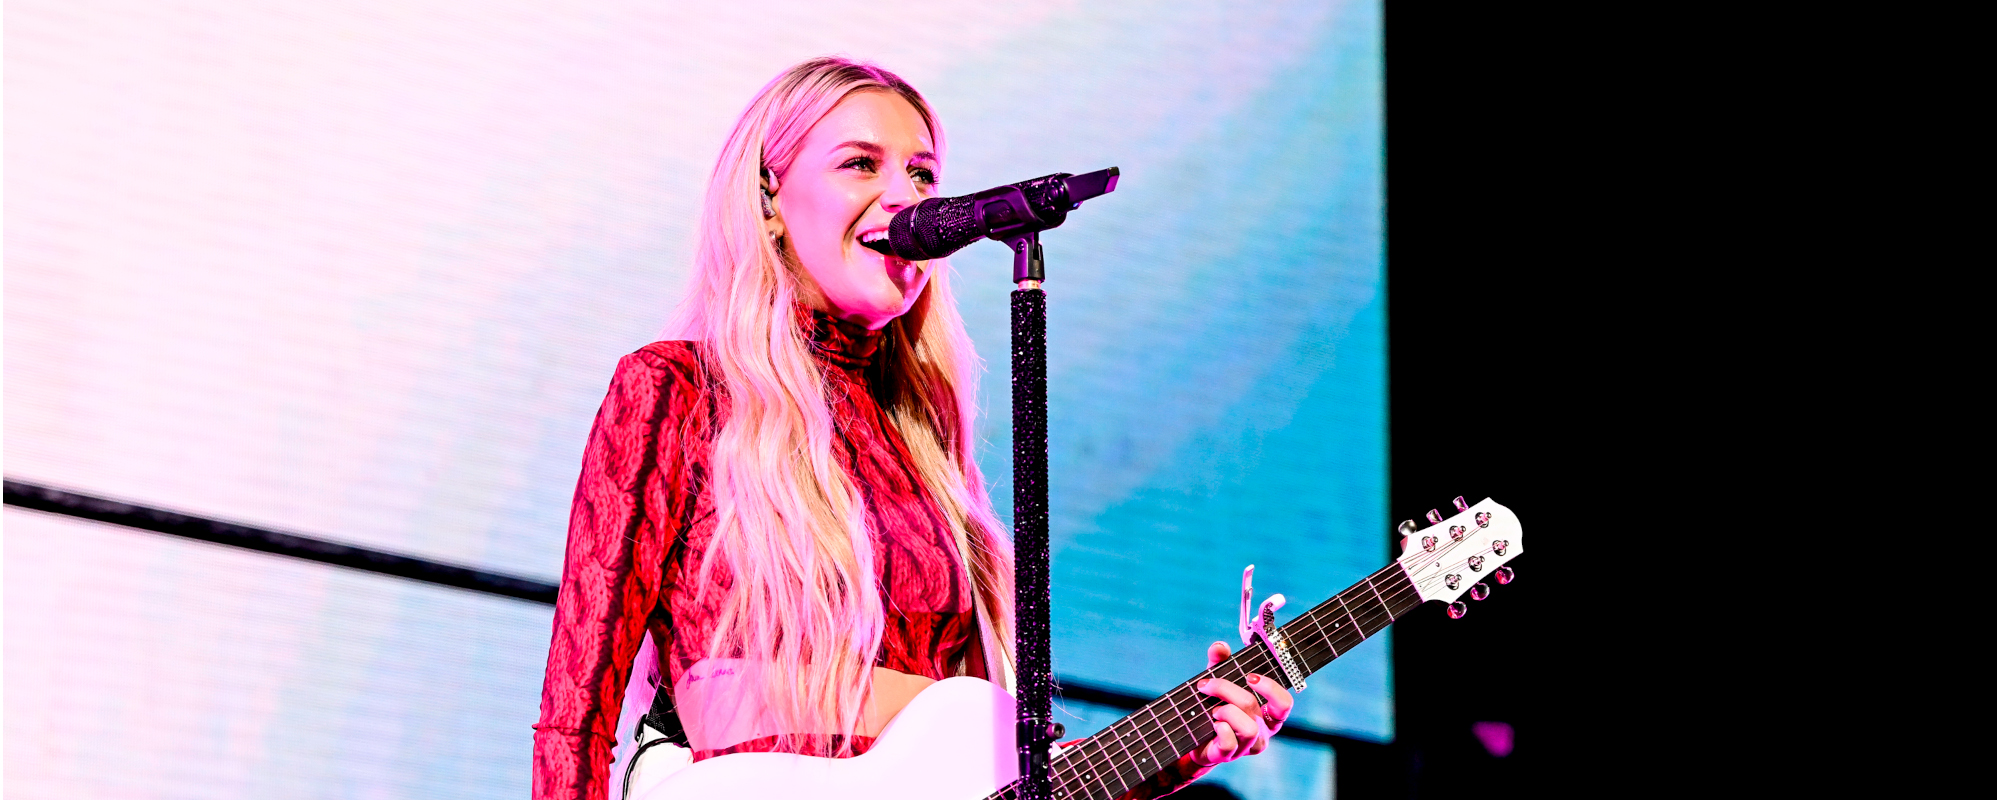 Kelsea Ballerini Performs “Penthouse” at the Grand Ole Opry 100.9 The